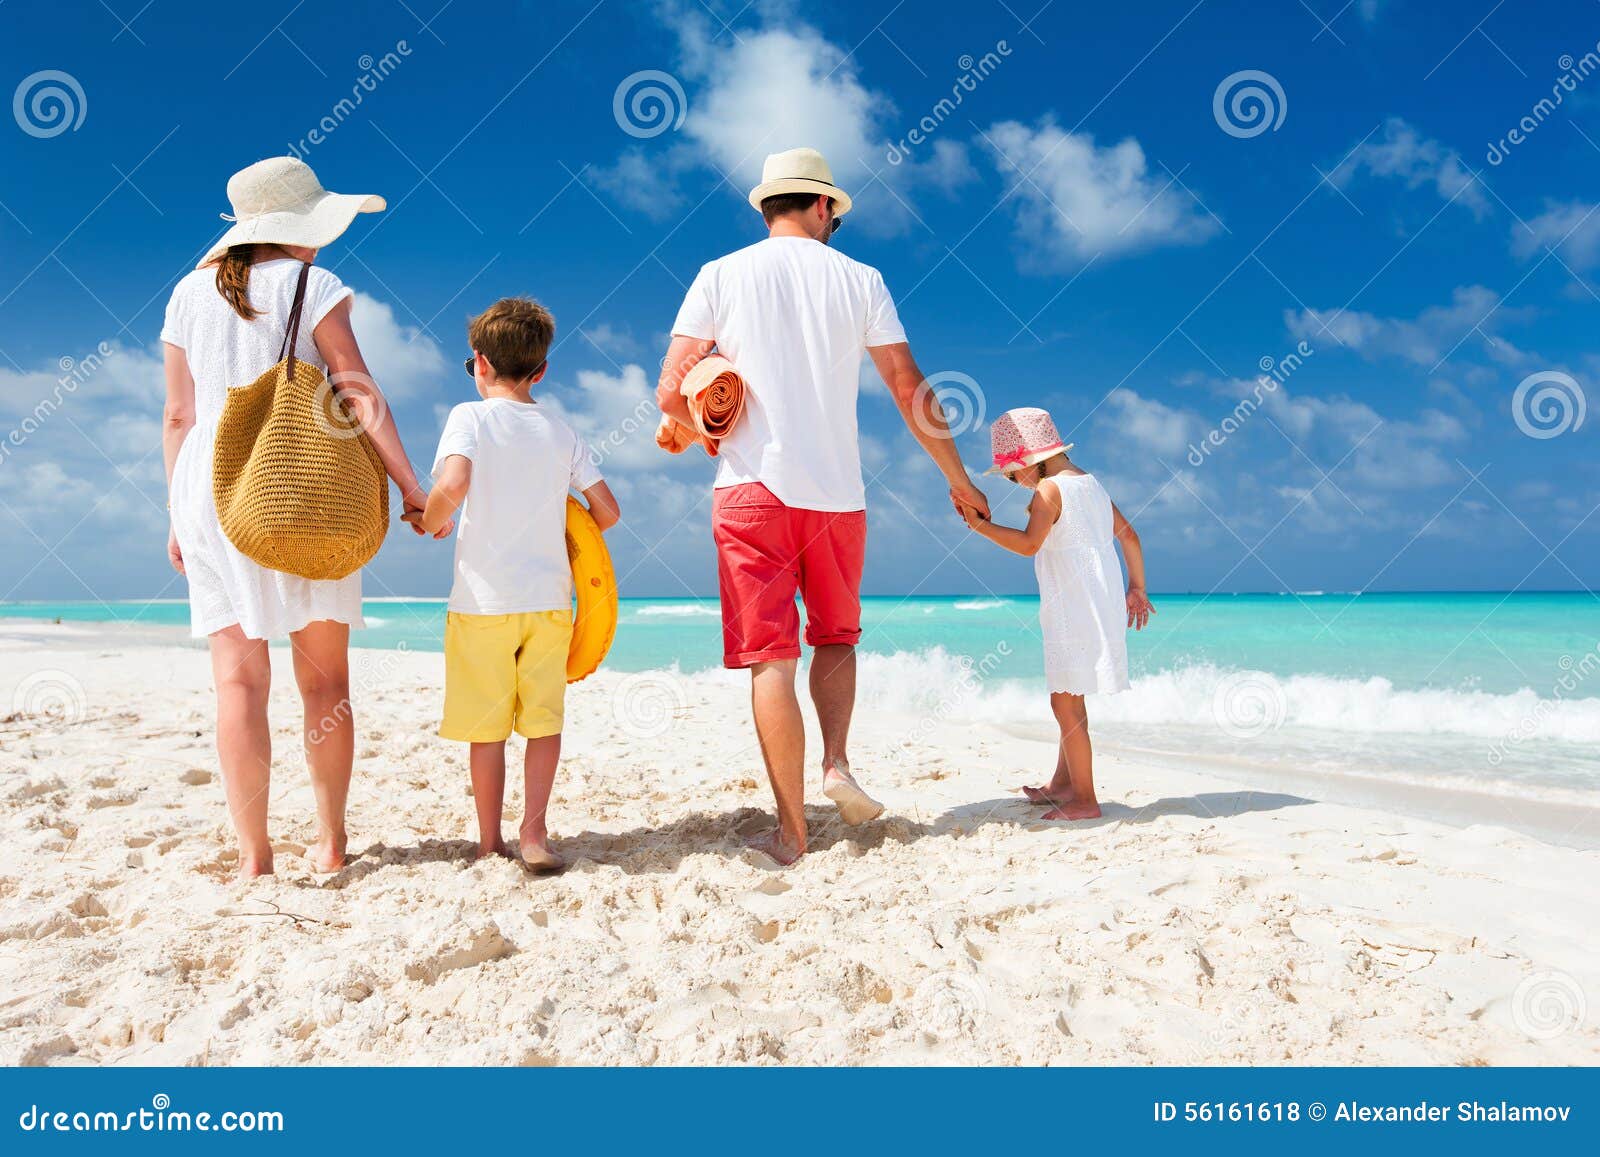 Family With Kids On Beach Vacation Stock Photo  Image of 